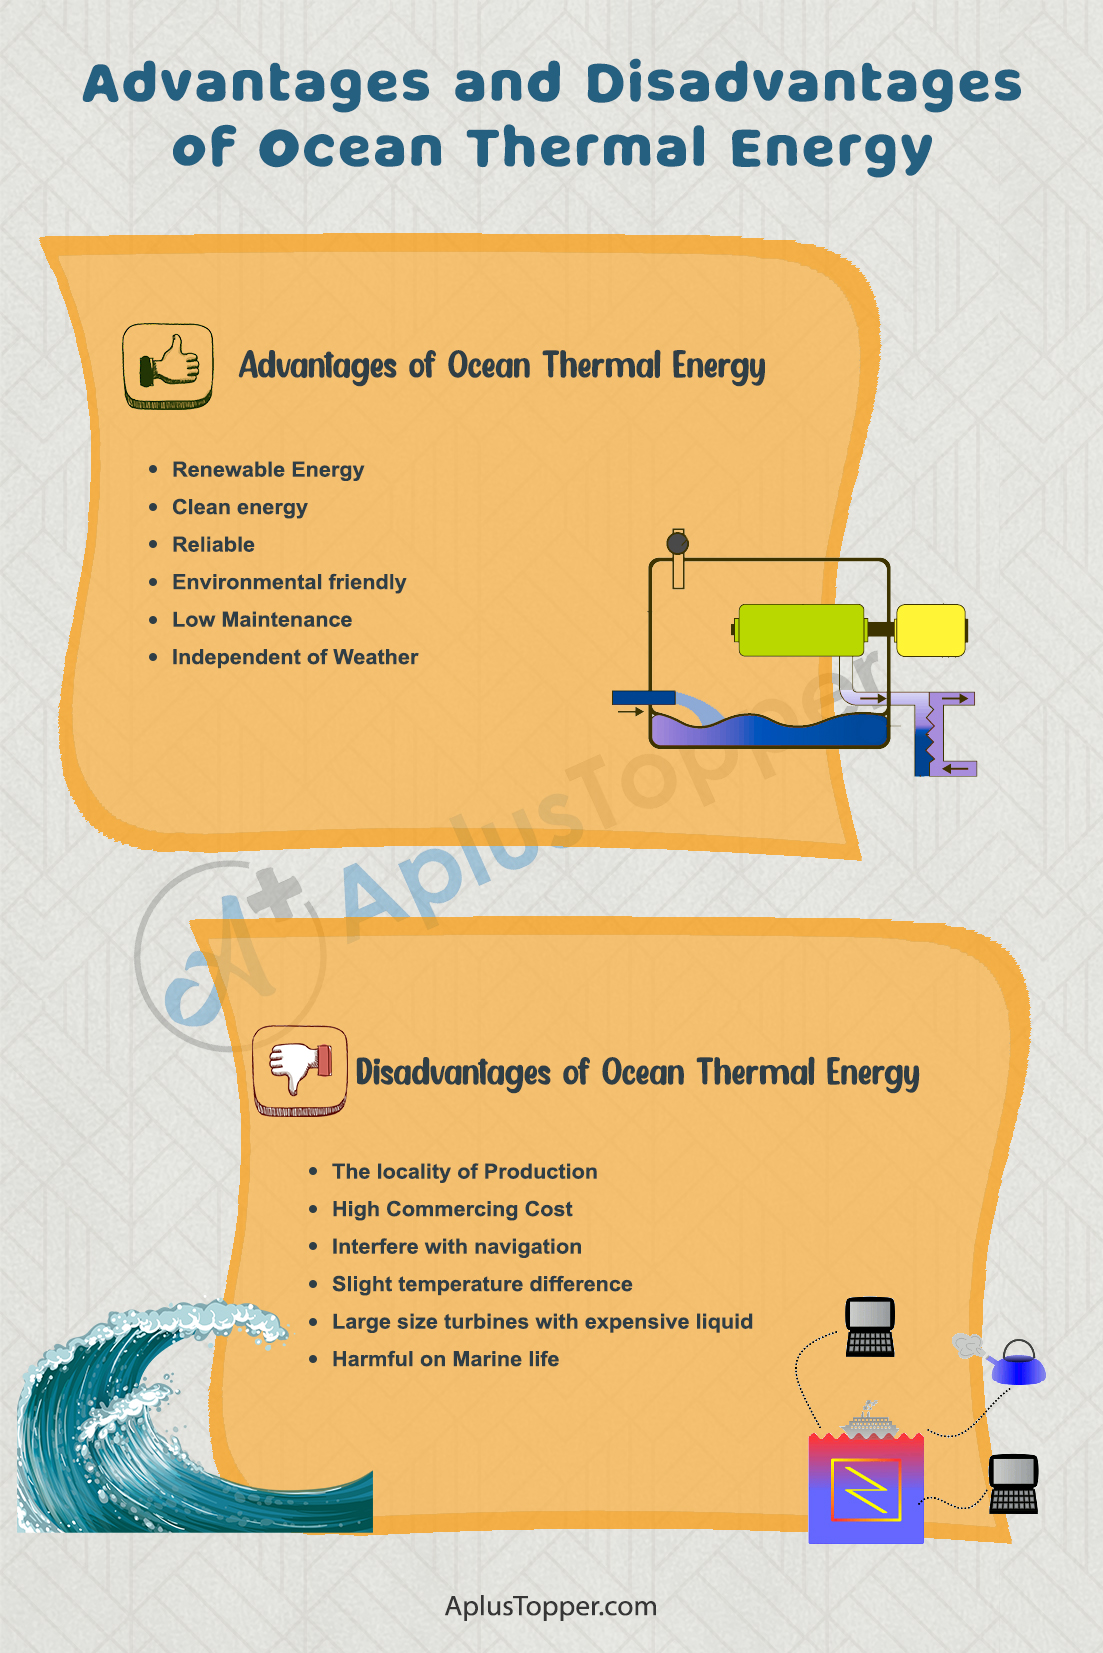 Advantages and Disadvantages of Ocean Thermal Energy 2